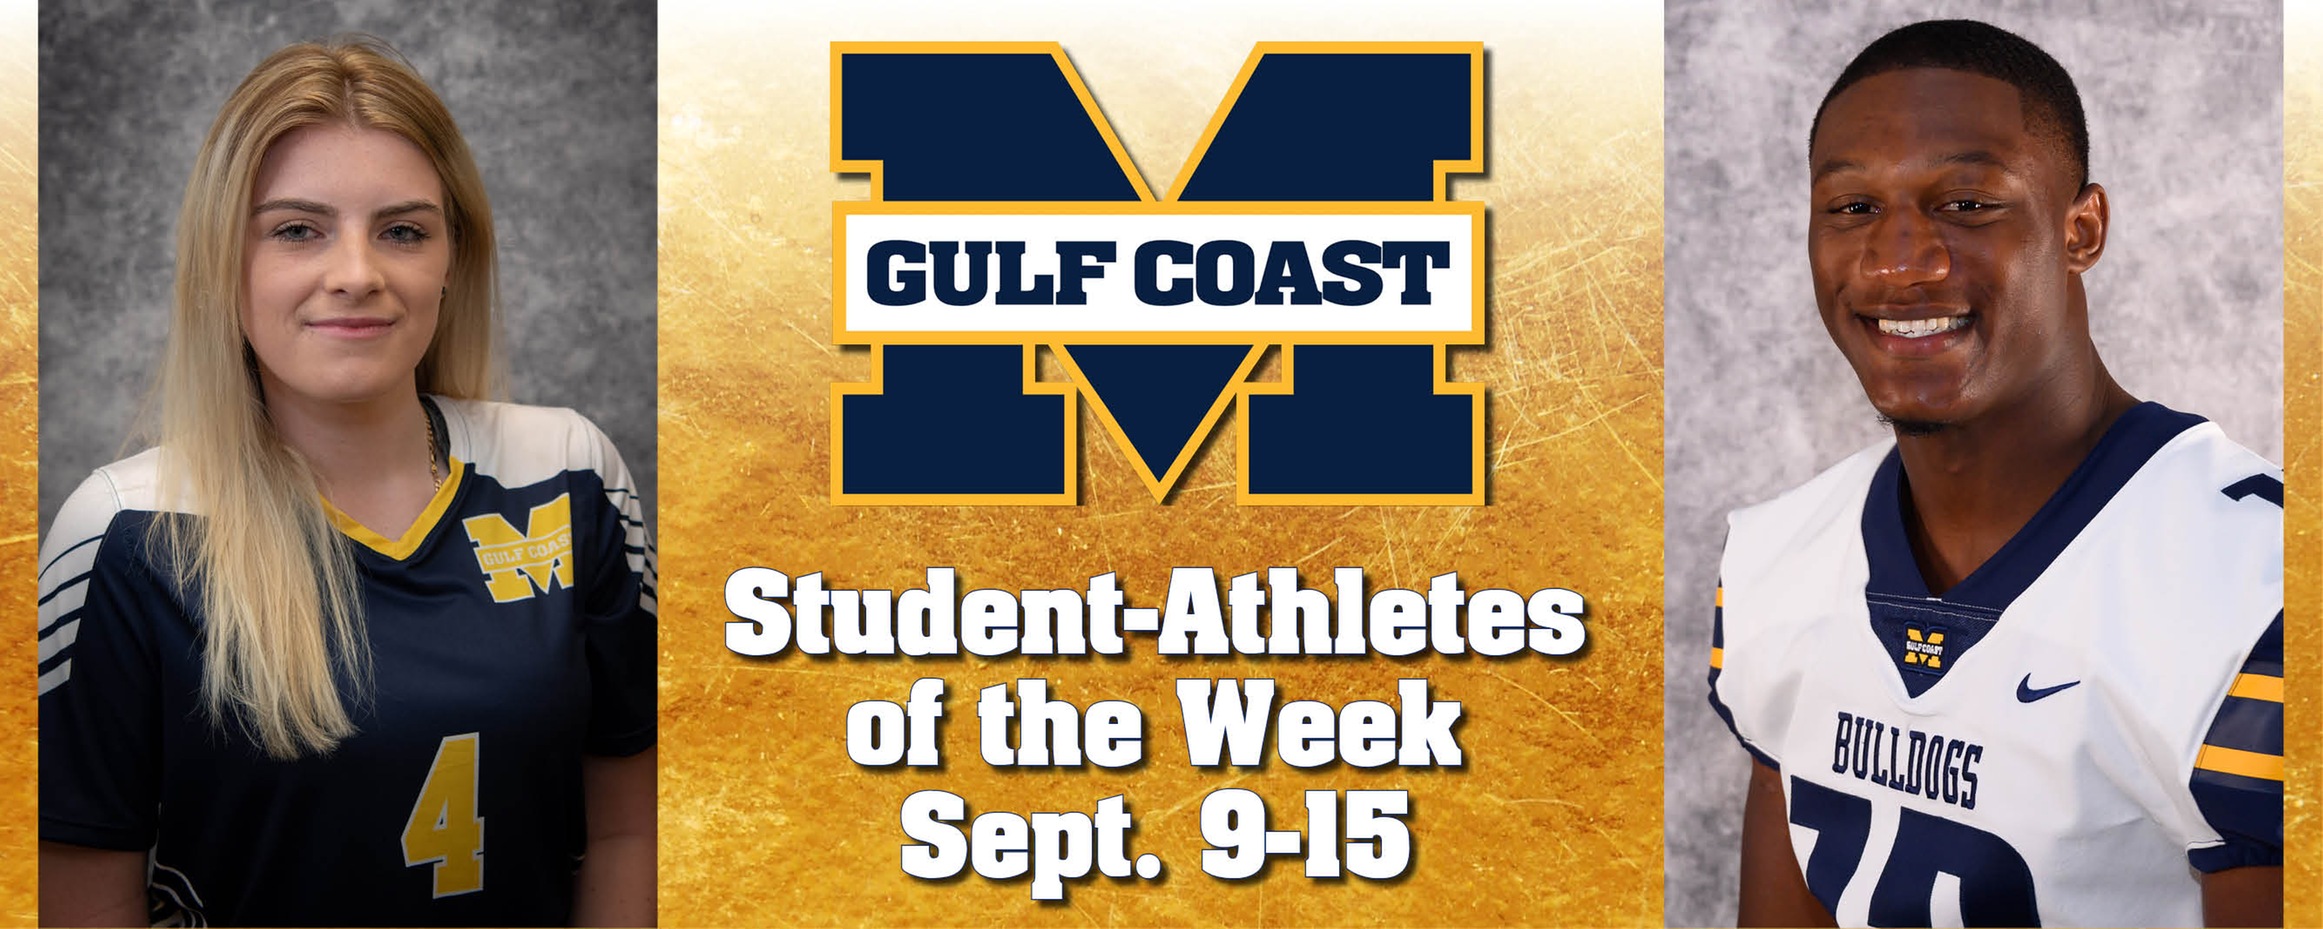 Payne, Smith named MGCCC Student-Athletes of the Week